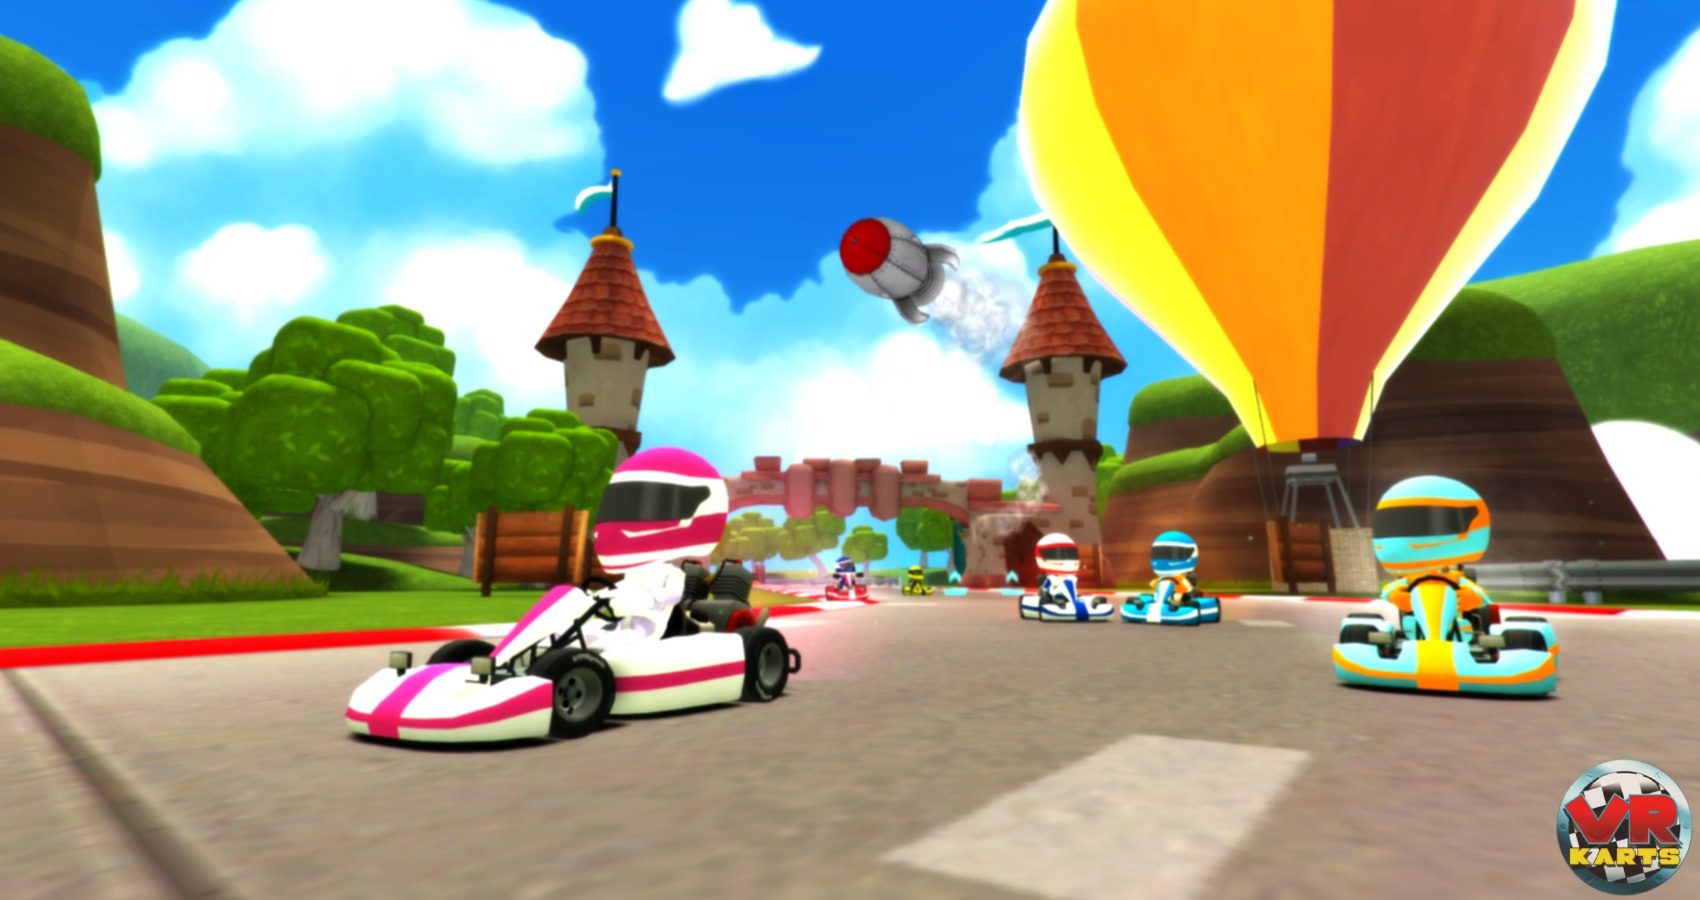 Preview: 'VR Karts' Open Beta, Now Available on Steam Early Access – Road to